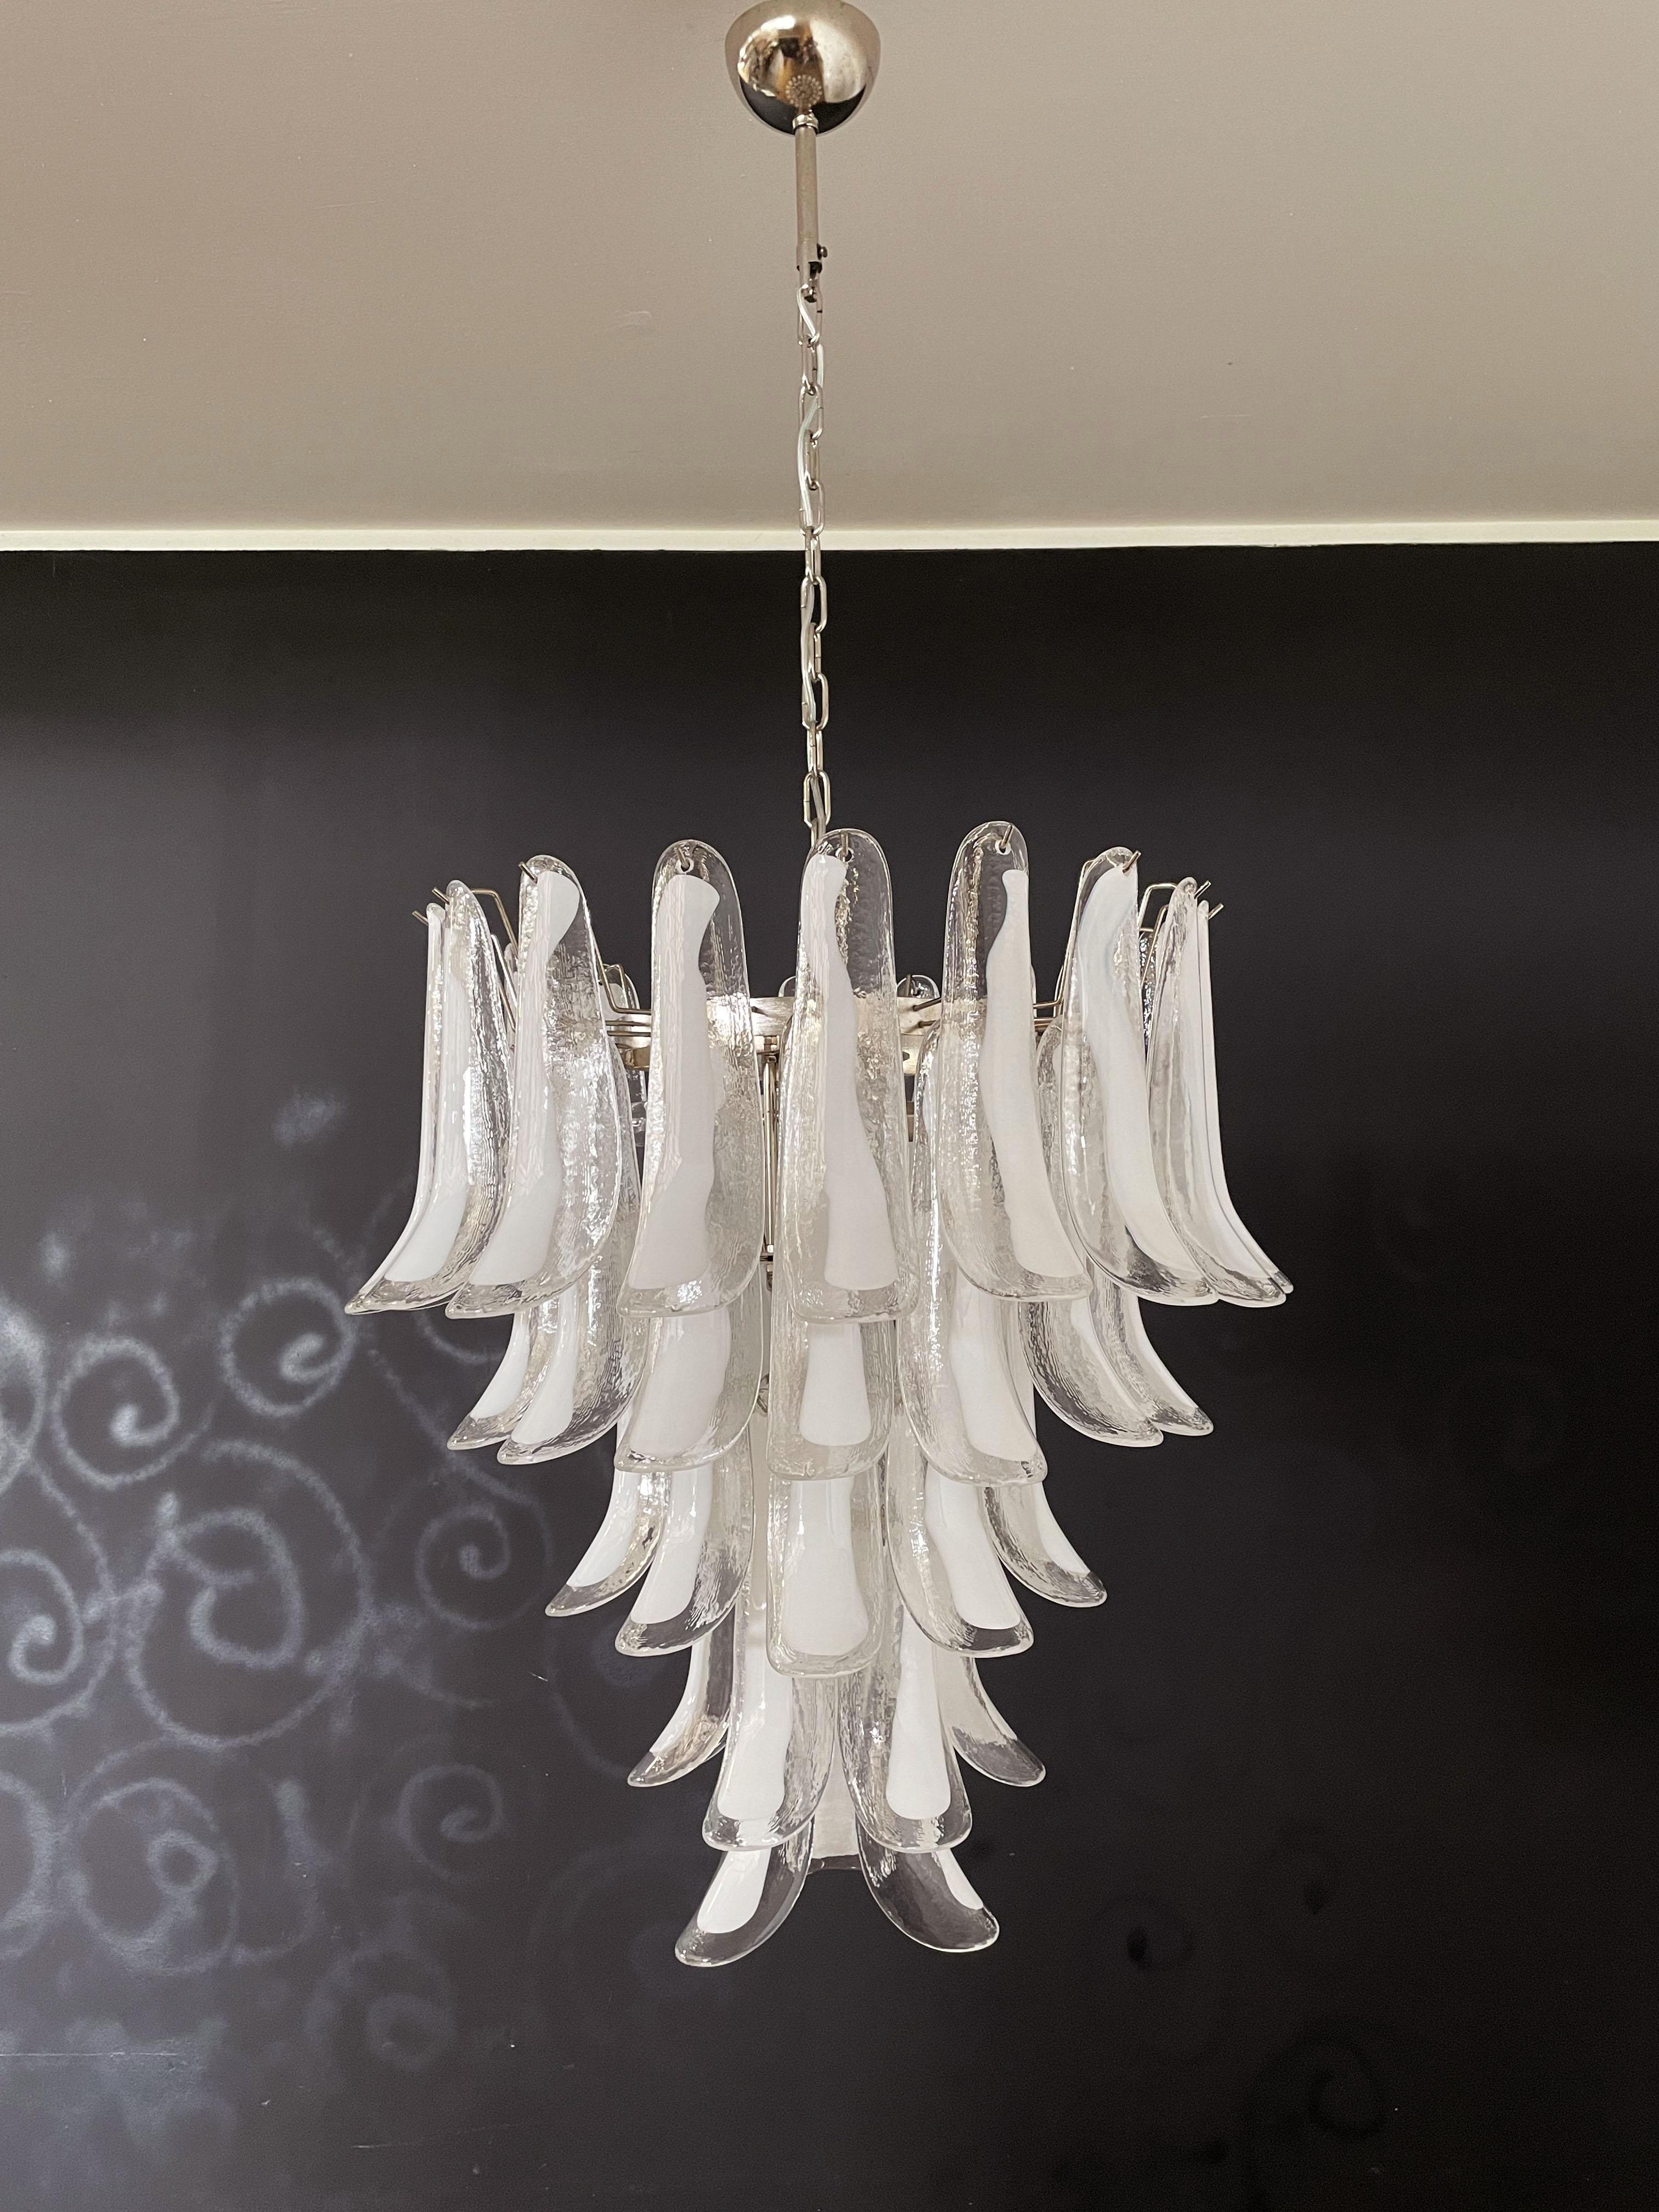 Art Glass Italian vintage Murano chandelier in the manner of Mazzega - 52 glass petals For Sale